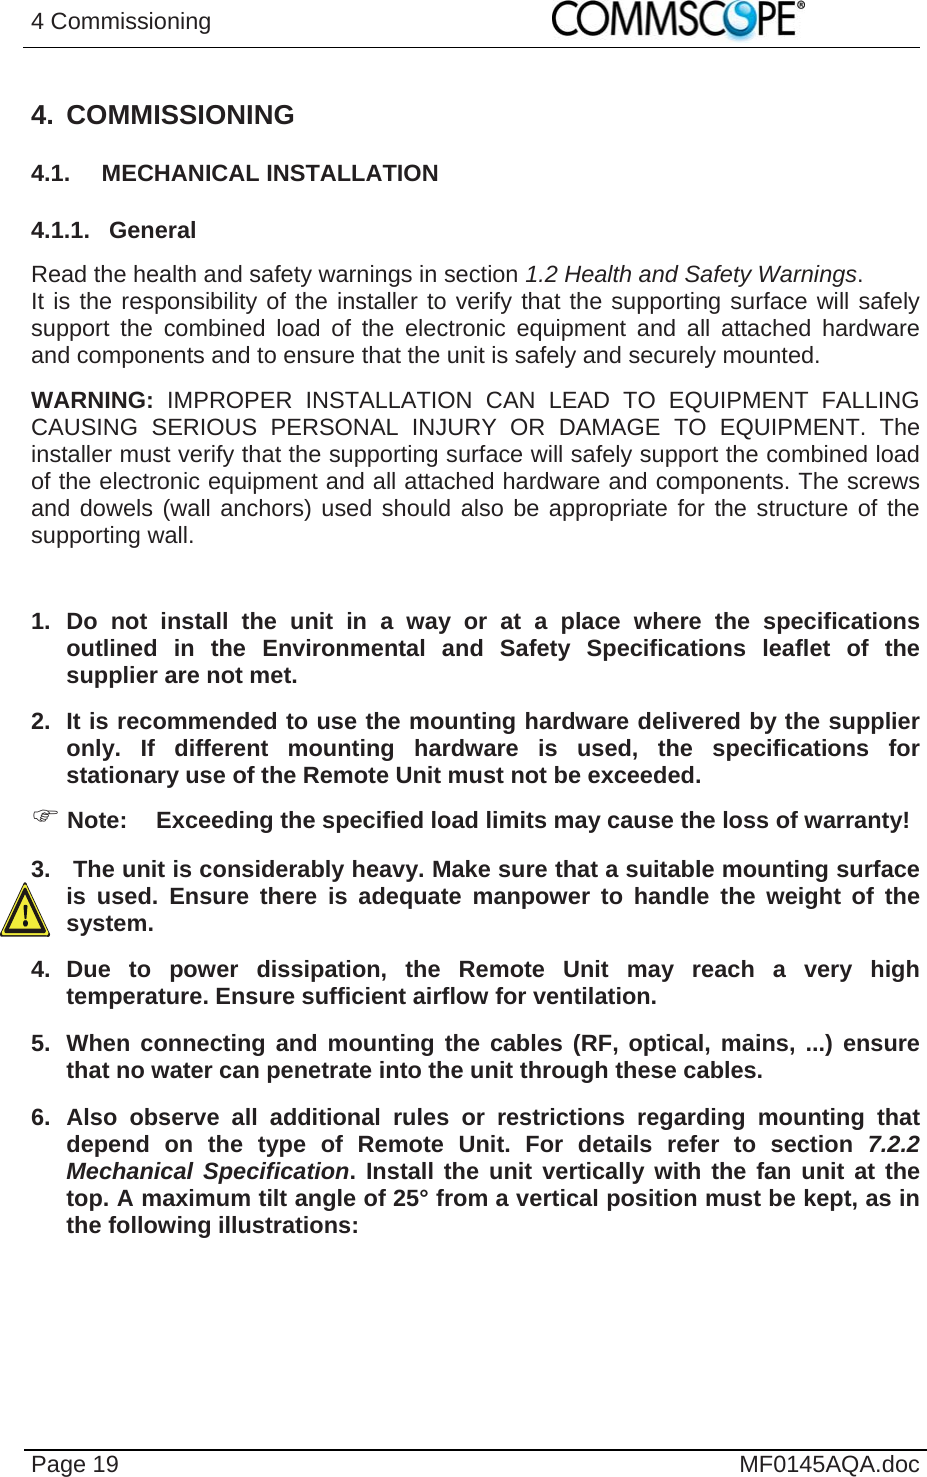 4 Commissioning    Page 19  MF0145AQA.doc 4. COMMISSIONING 4.1. MECHANICAL INSTALLATION 4.1.1. General Read the health and safety warnings in section 1.2 Health and Safety Warnings. It is the responsibility of the installer to verify that the supporting surface will safely support the combined load of the electronic equipment and all attached hardware and components and to ensure that the unit is safely and securely mounted.  WARNING: IMPROPER INSTALLATION CAN LEAD TO EQUIPMENT FALLING CAUSING SERIOUS PERSONAL INJURY OR DAMAGE TO EQUIPMENT. The installer must verify that the supporting surface will safely support the combined load of the electronic equipment and all attached hardware and components. The screws and dowels (wall anchors) used should also be appropriate for the structure of the supporting wall.  1. Do not install the unit in a way or at a place where the specifications outlined in the Environmental and Safety Specifications leaflet of the supplier are not met. 2.  It is recommended to use the mounting hardware delivered by the supplier only. If different mounting hardware is used, the specifications for stationary use of the Remote Unit must not be exceeded.  Note:  Exceeding the specified load limits may cause the loss of warranty! 3.   The unit is considerably heavy. Make sure that a suitable mounting surface is used. Ensure there is adequate manpower to handle the weight of the system. 4. Due to power dissipation, the Remote Unit may reach a very high temperature. Ensure sufficient airflow for ventilation. 5.  When connecting and mounting the cables (RF, optical, mains, ...) ensure that no water can penetrate into the unit through these cables. 6. Also observe all additional rules or restrictions regarding mounting that depend on the type of Remote Unit. For details refer to section 7.2.2 Mechanical Specification. Install the unit vertically with the fan unit at the top. A maximum tilt angle of 25° from a vertical position must be kept, as in the following illustrations: 